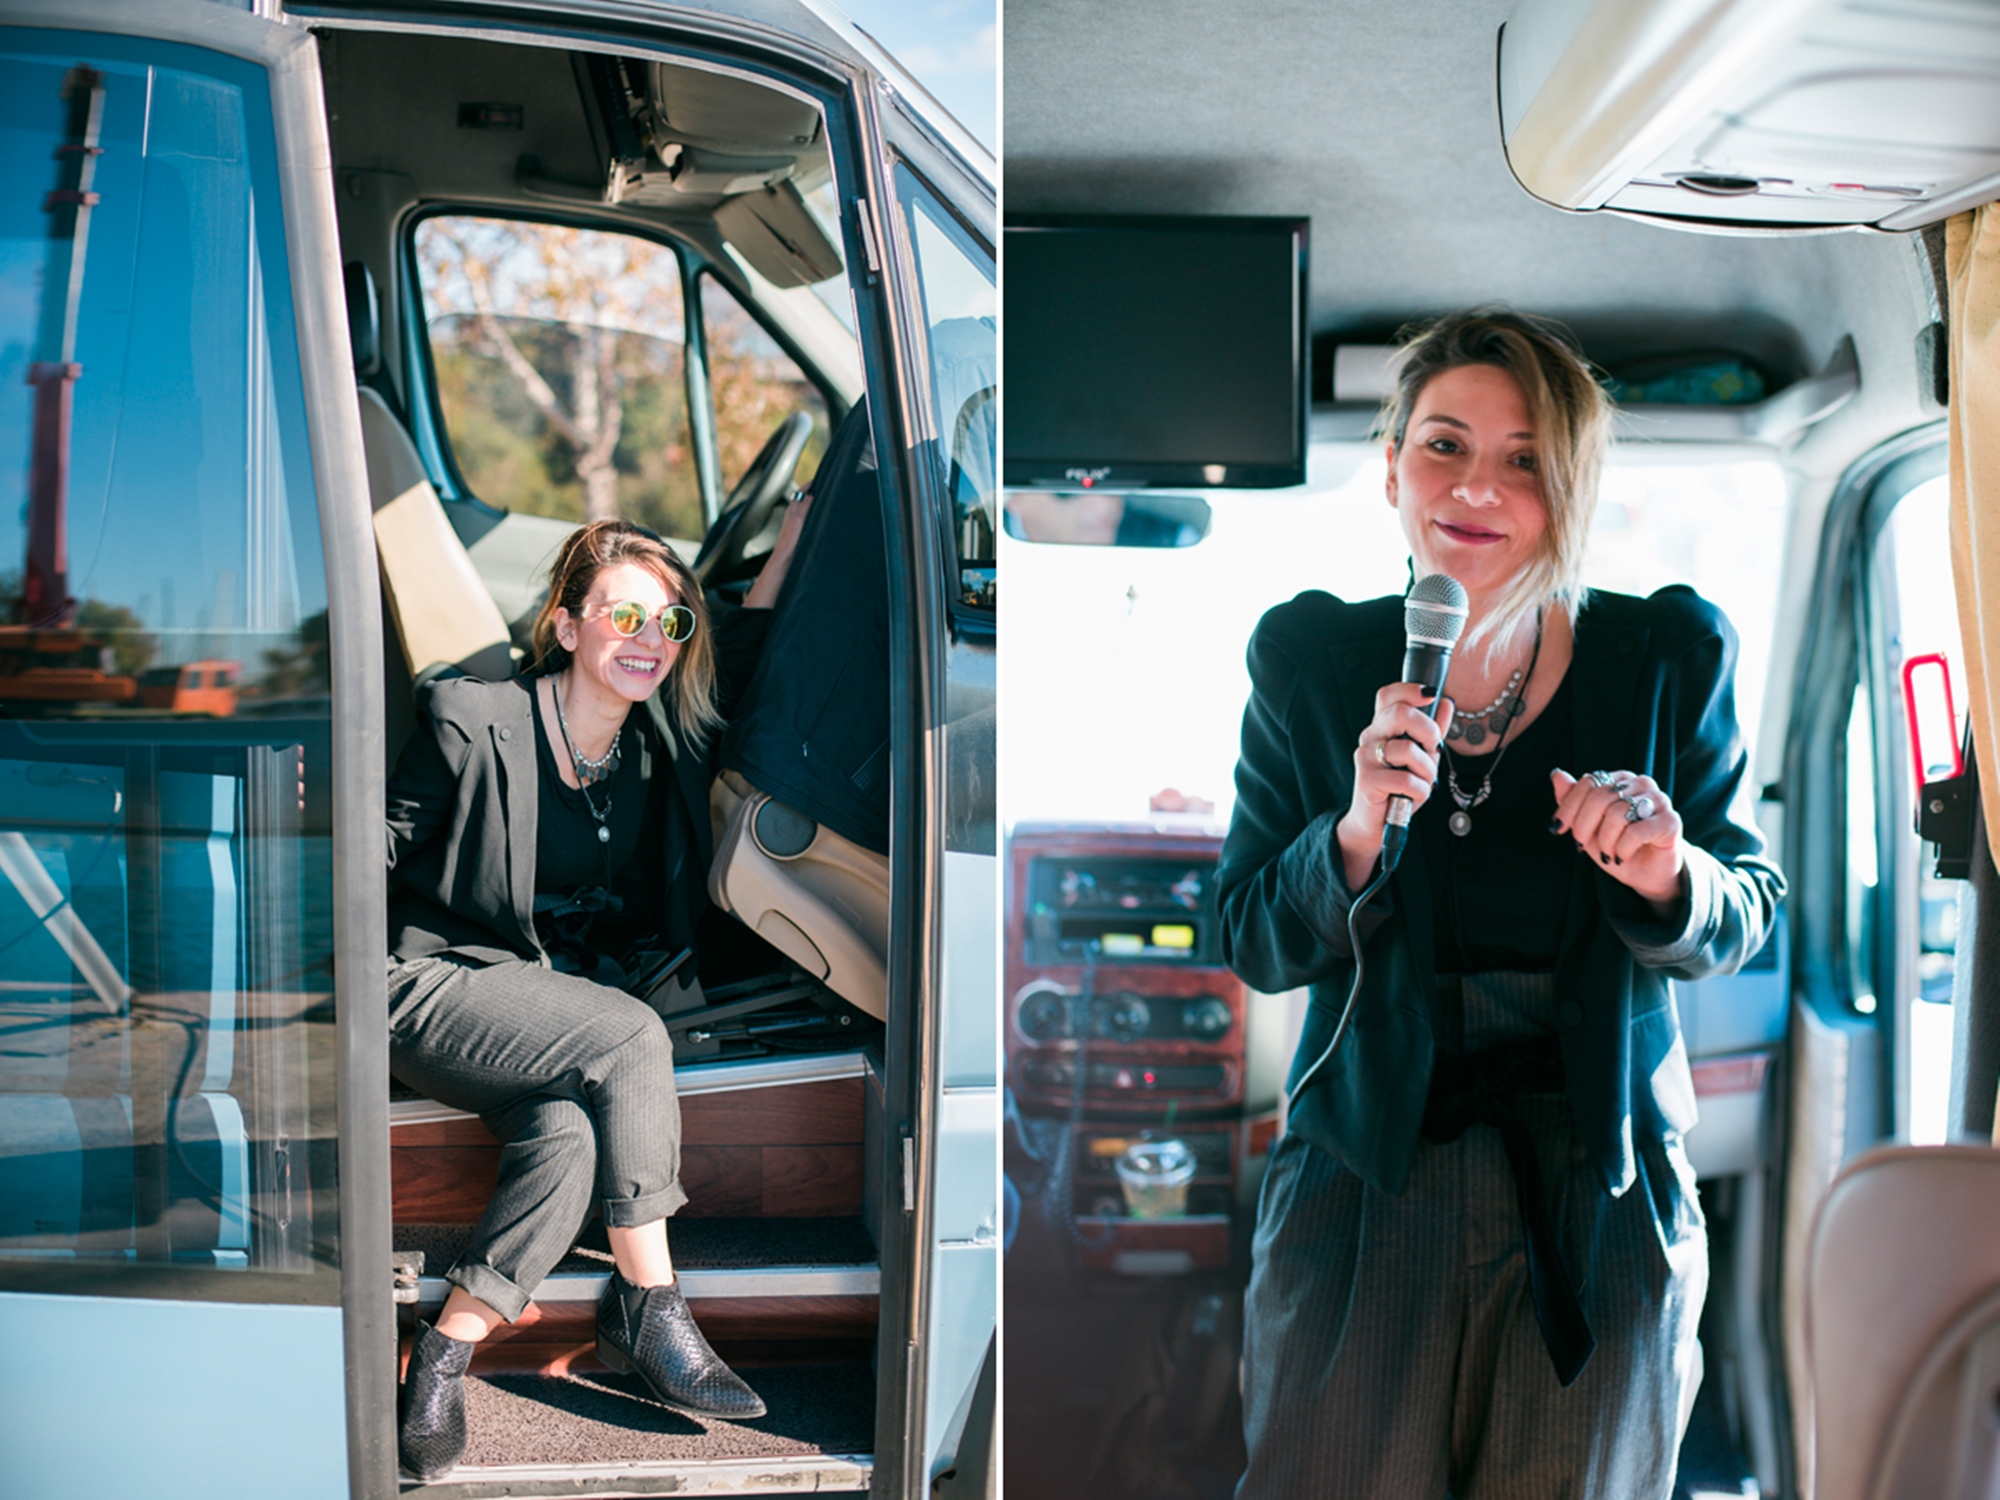 A Bachelorette bus for the most amazing bachelor parties